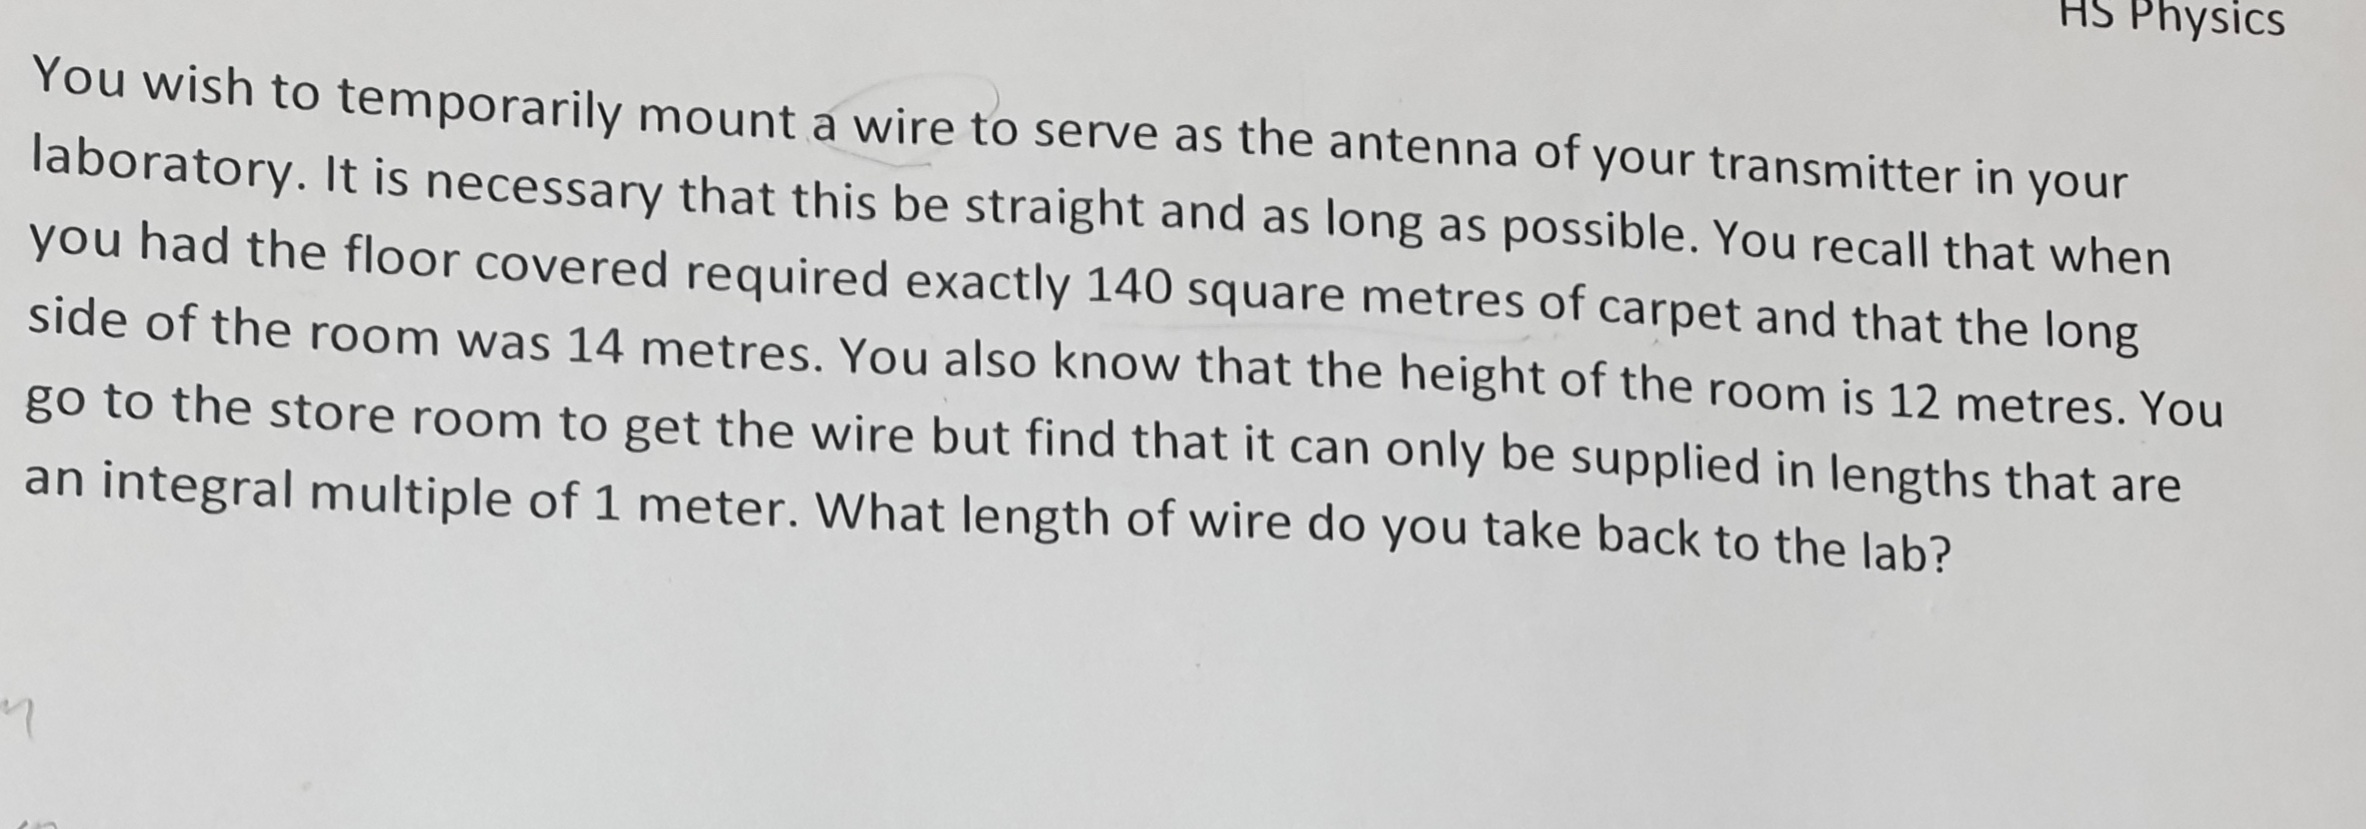 You wish to temporarily mount a wire to serve as the antenna of your transmitter in your
laboratory. It is necessary that this be straight and as long as possible. You recall that when
you had the floor covered required exactly 140 square metres of carpet and that the long
side of the room was 14 metres. You also know that the height of the room is 12 metres. You
go to the store room to get the wire but find that it can only be supplied in lengths that are
an integral multiple of 1 meter. What length of wire do you take back to the lab?
